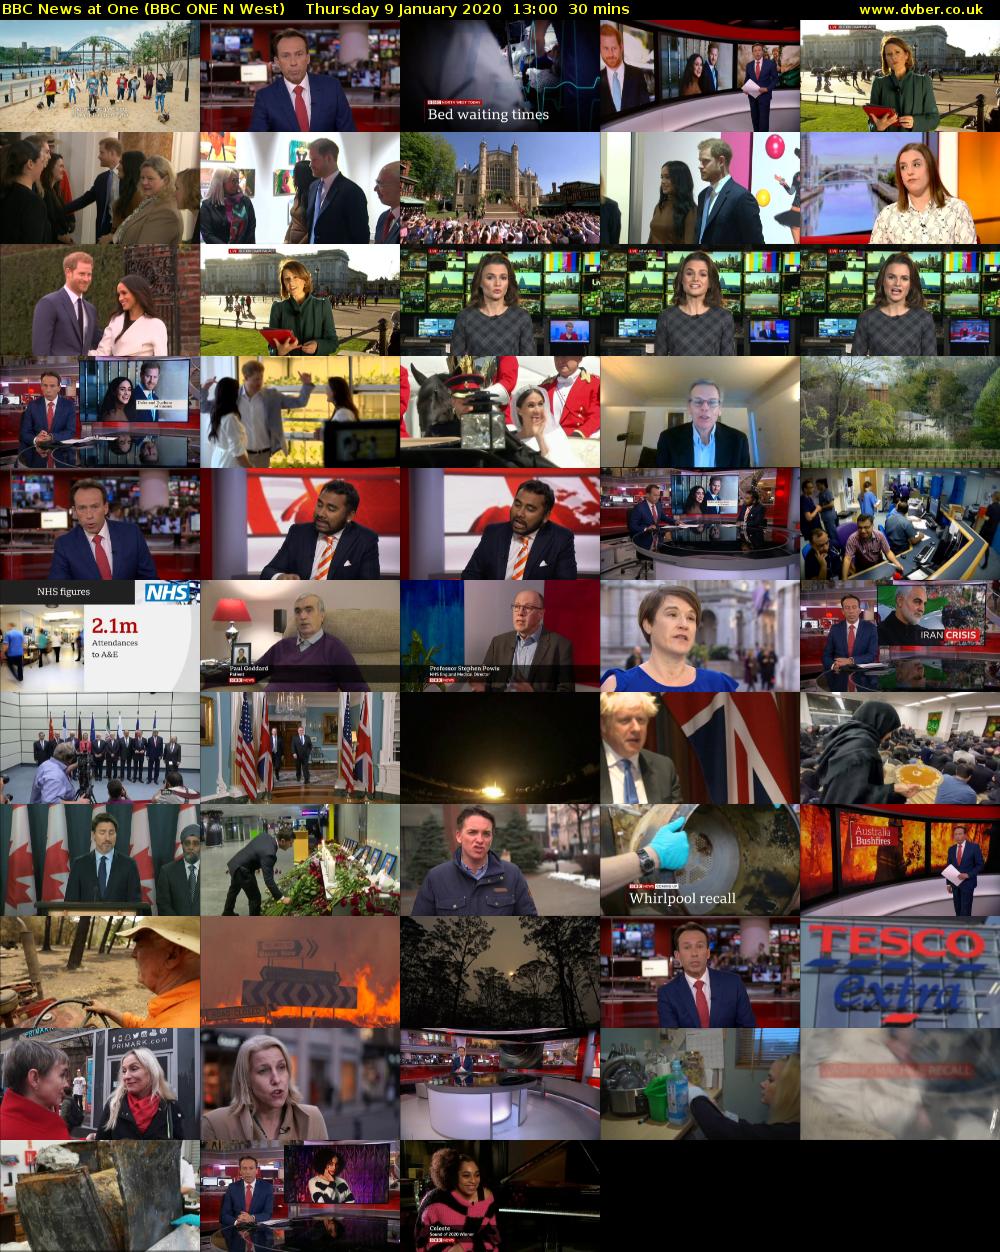 BBC News at One (BBC ONE N West) Thursday 9 January 2020 13:00 - 13:30